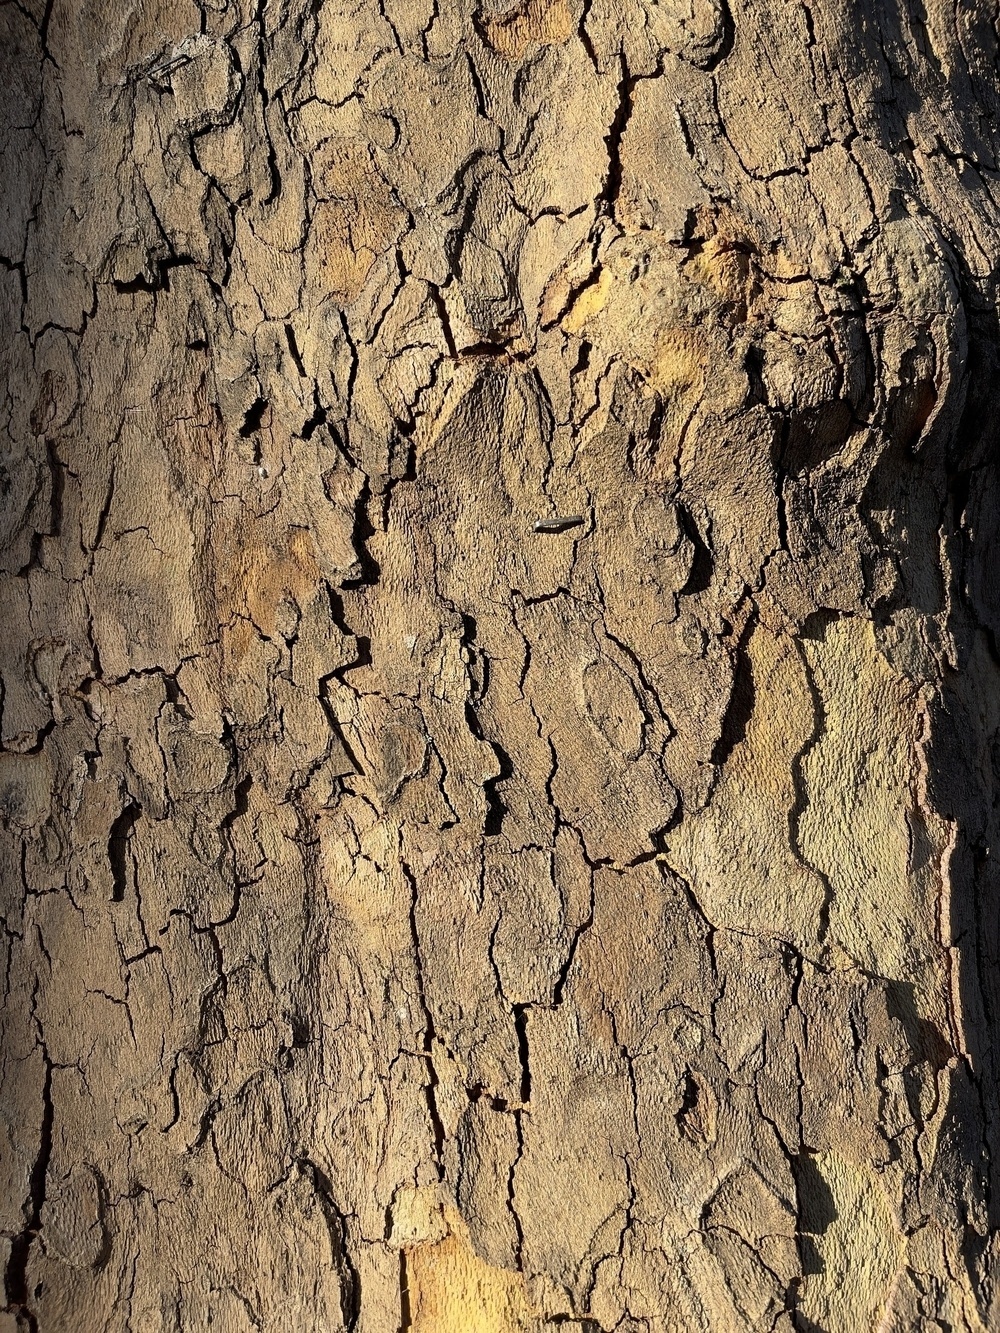 Closeup of tree bark with early morning light and staple.